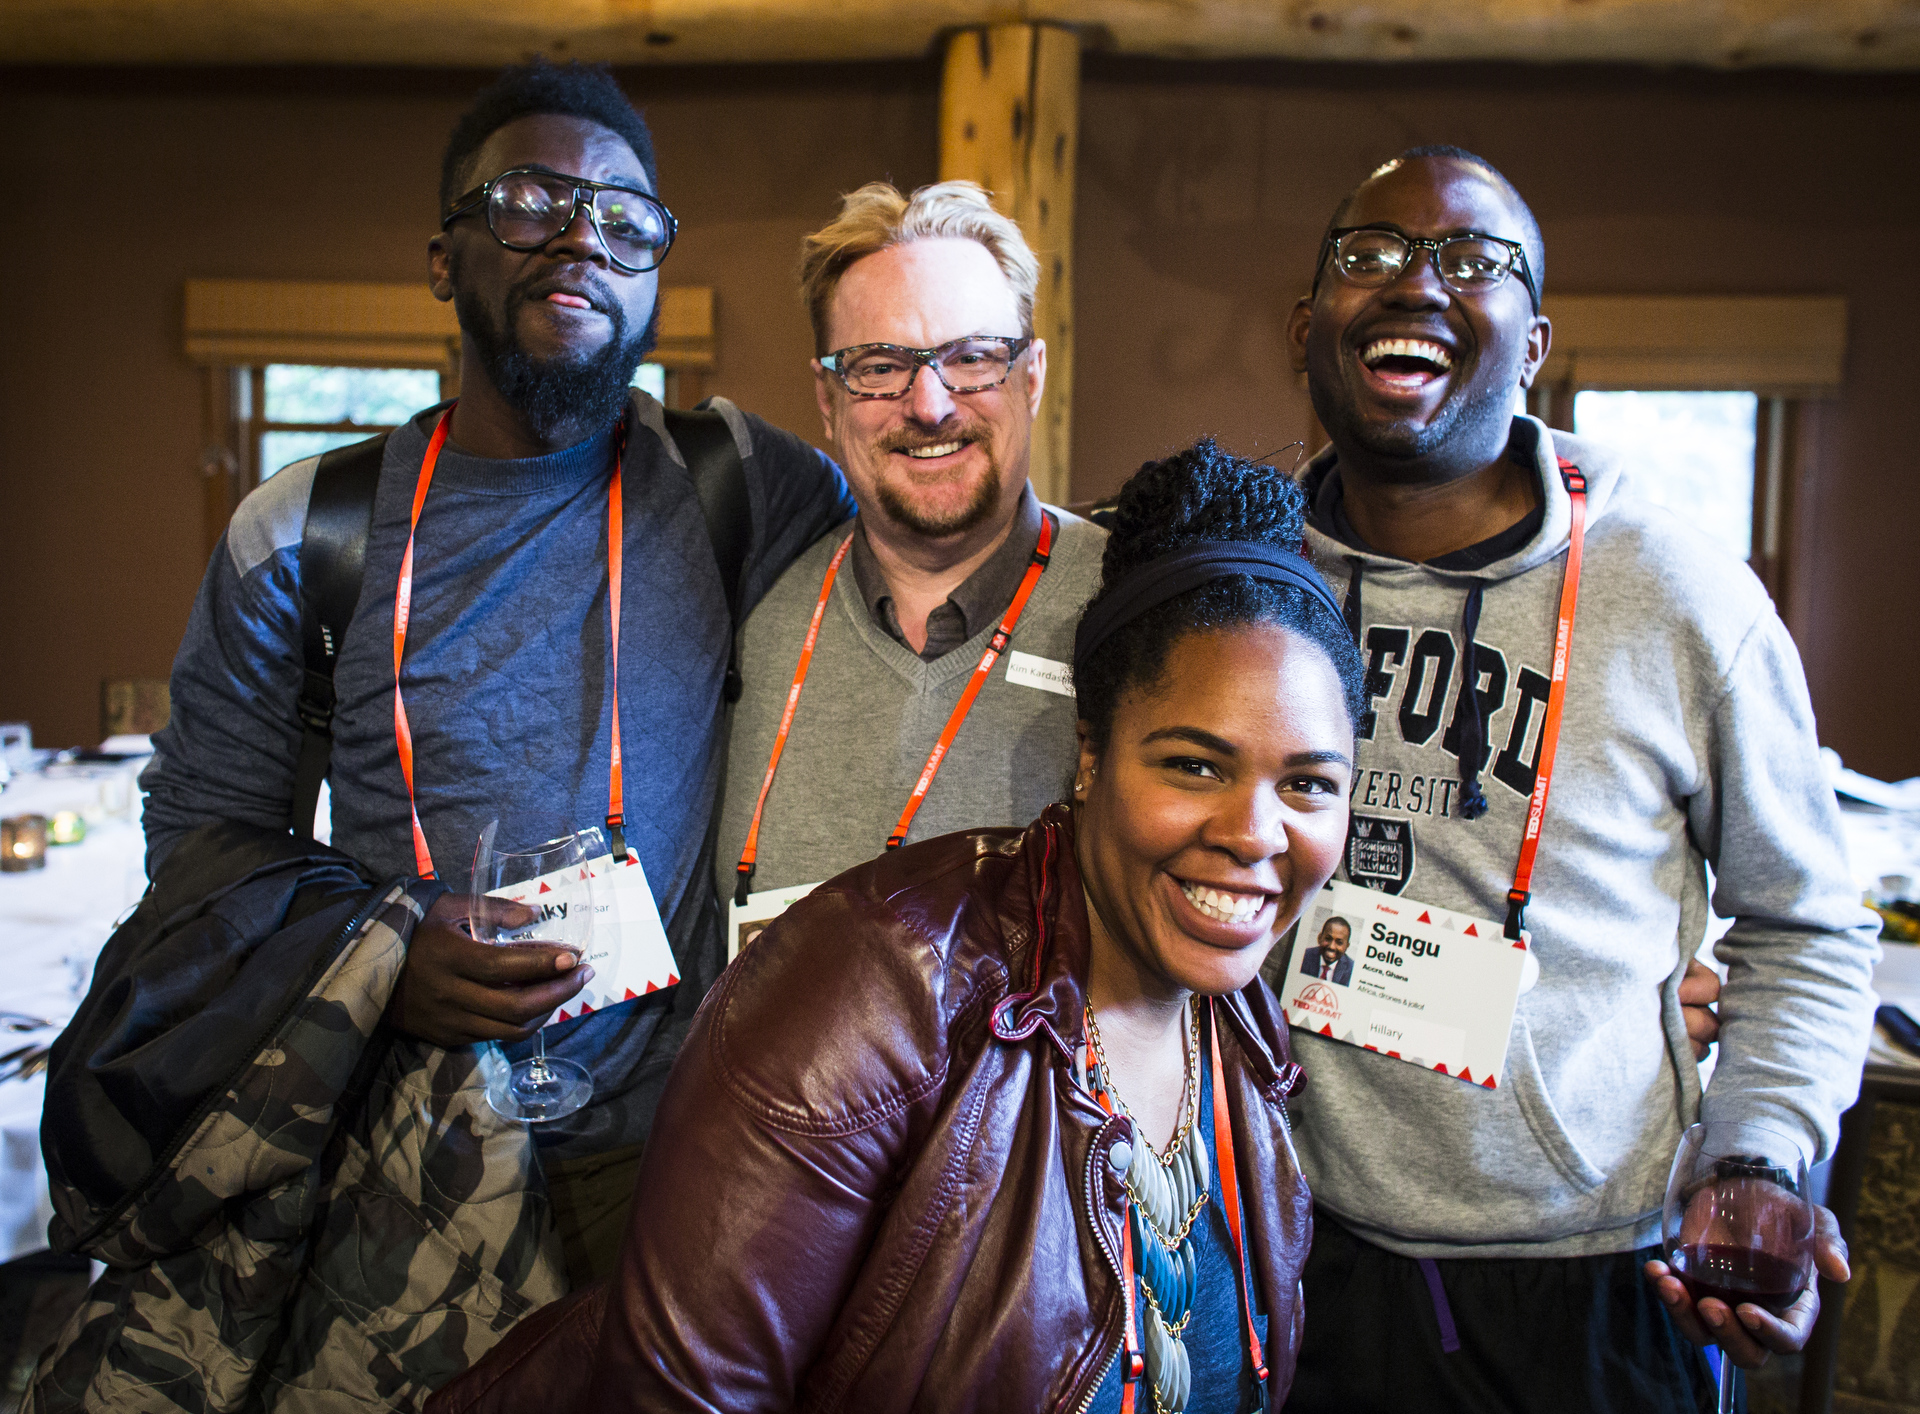 Musician "Blinky" Bill Sellanga, TED Fellows director Tom Rielly, physicist Jedidah Isler and entrepreneur Sangu Delle reconnect at a dinner for the TED Fellows at TEDSummit 2016, June 25, 2016, Banff, Canada. Photo: Ryan Lash / TED